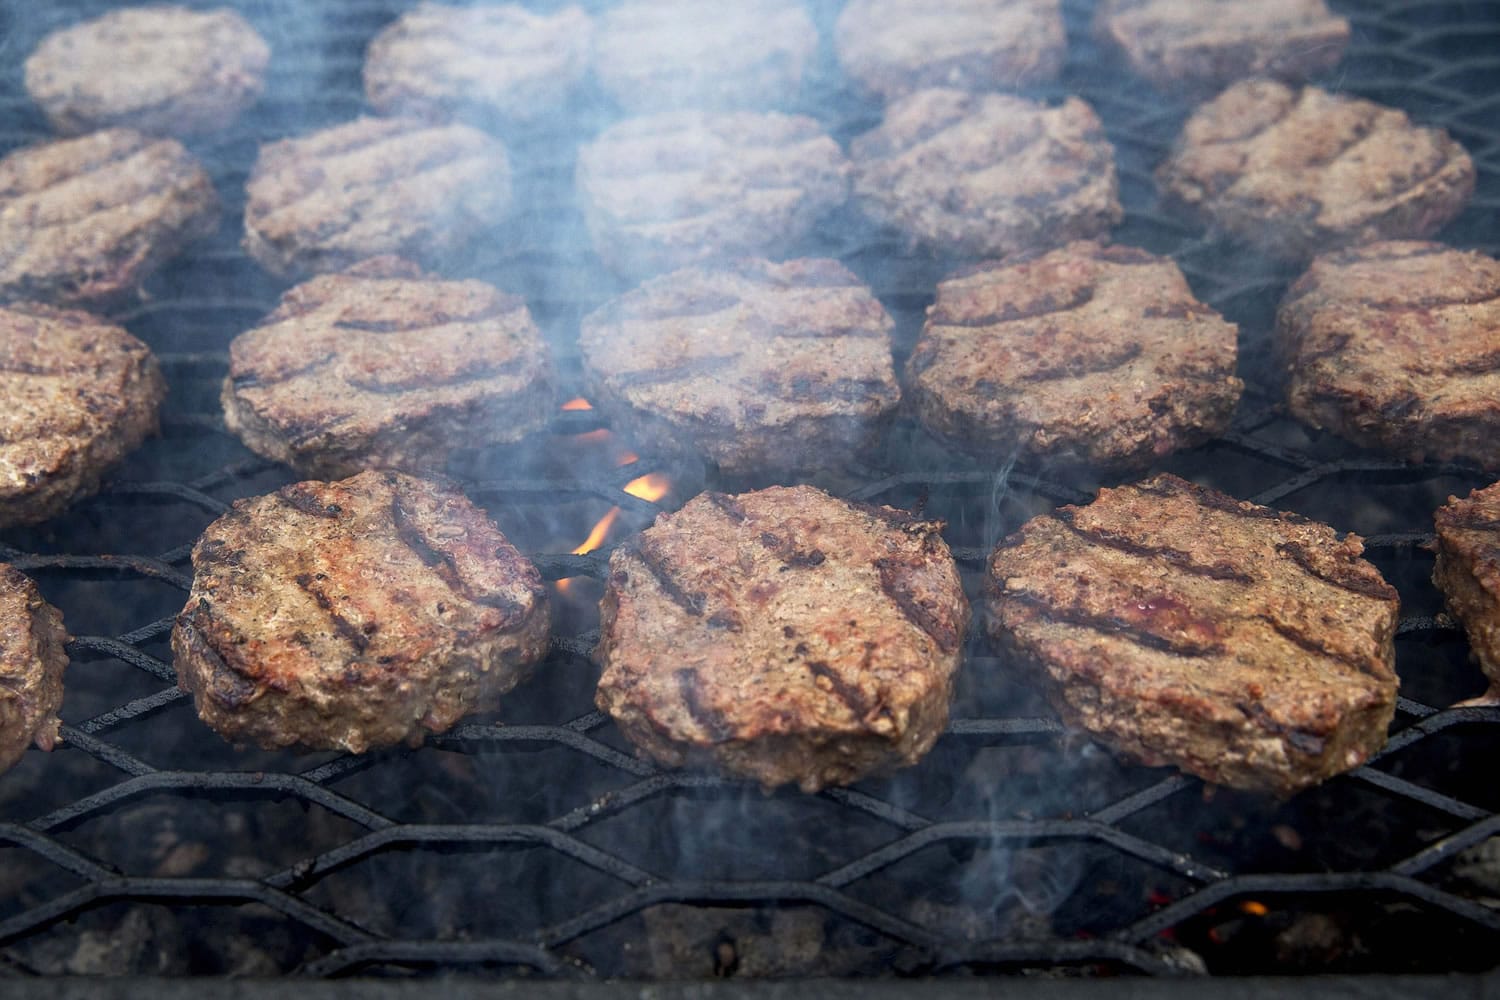 Smoke wafts up as hamburgers are cooked on a grill outside the White House in Washington.